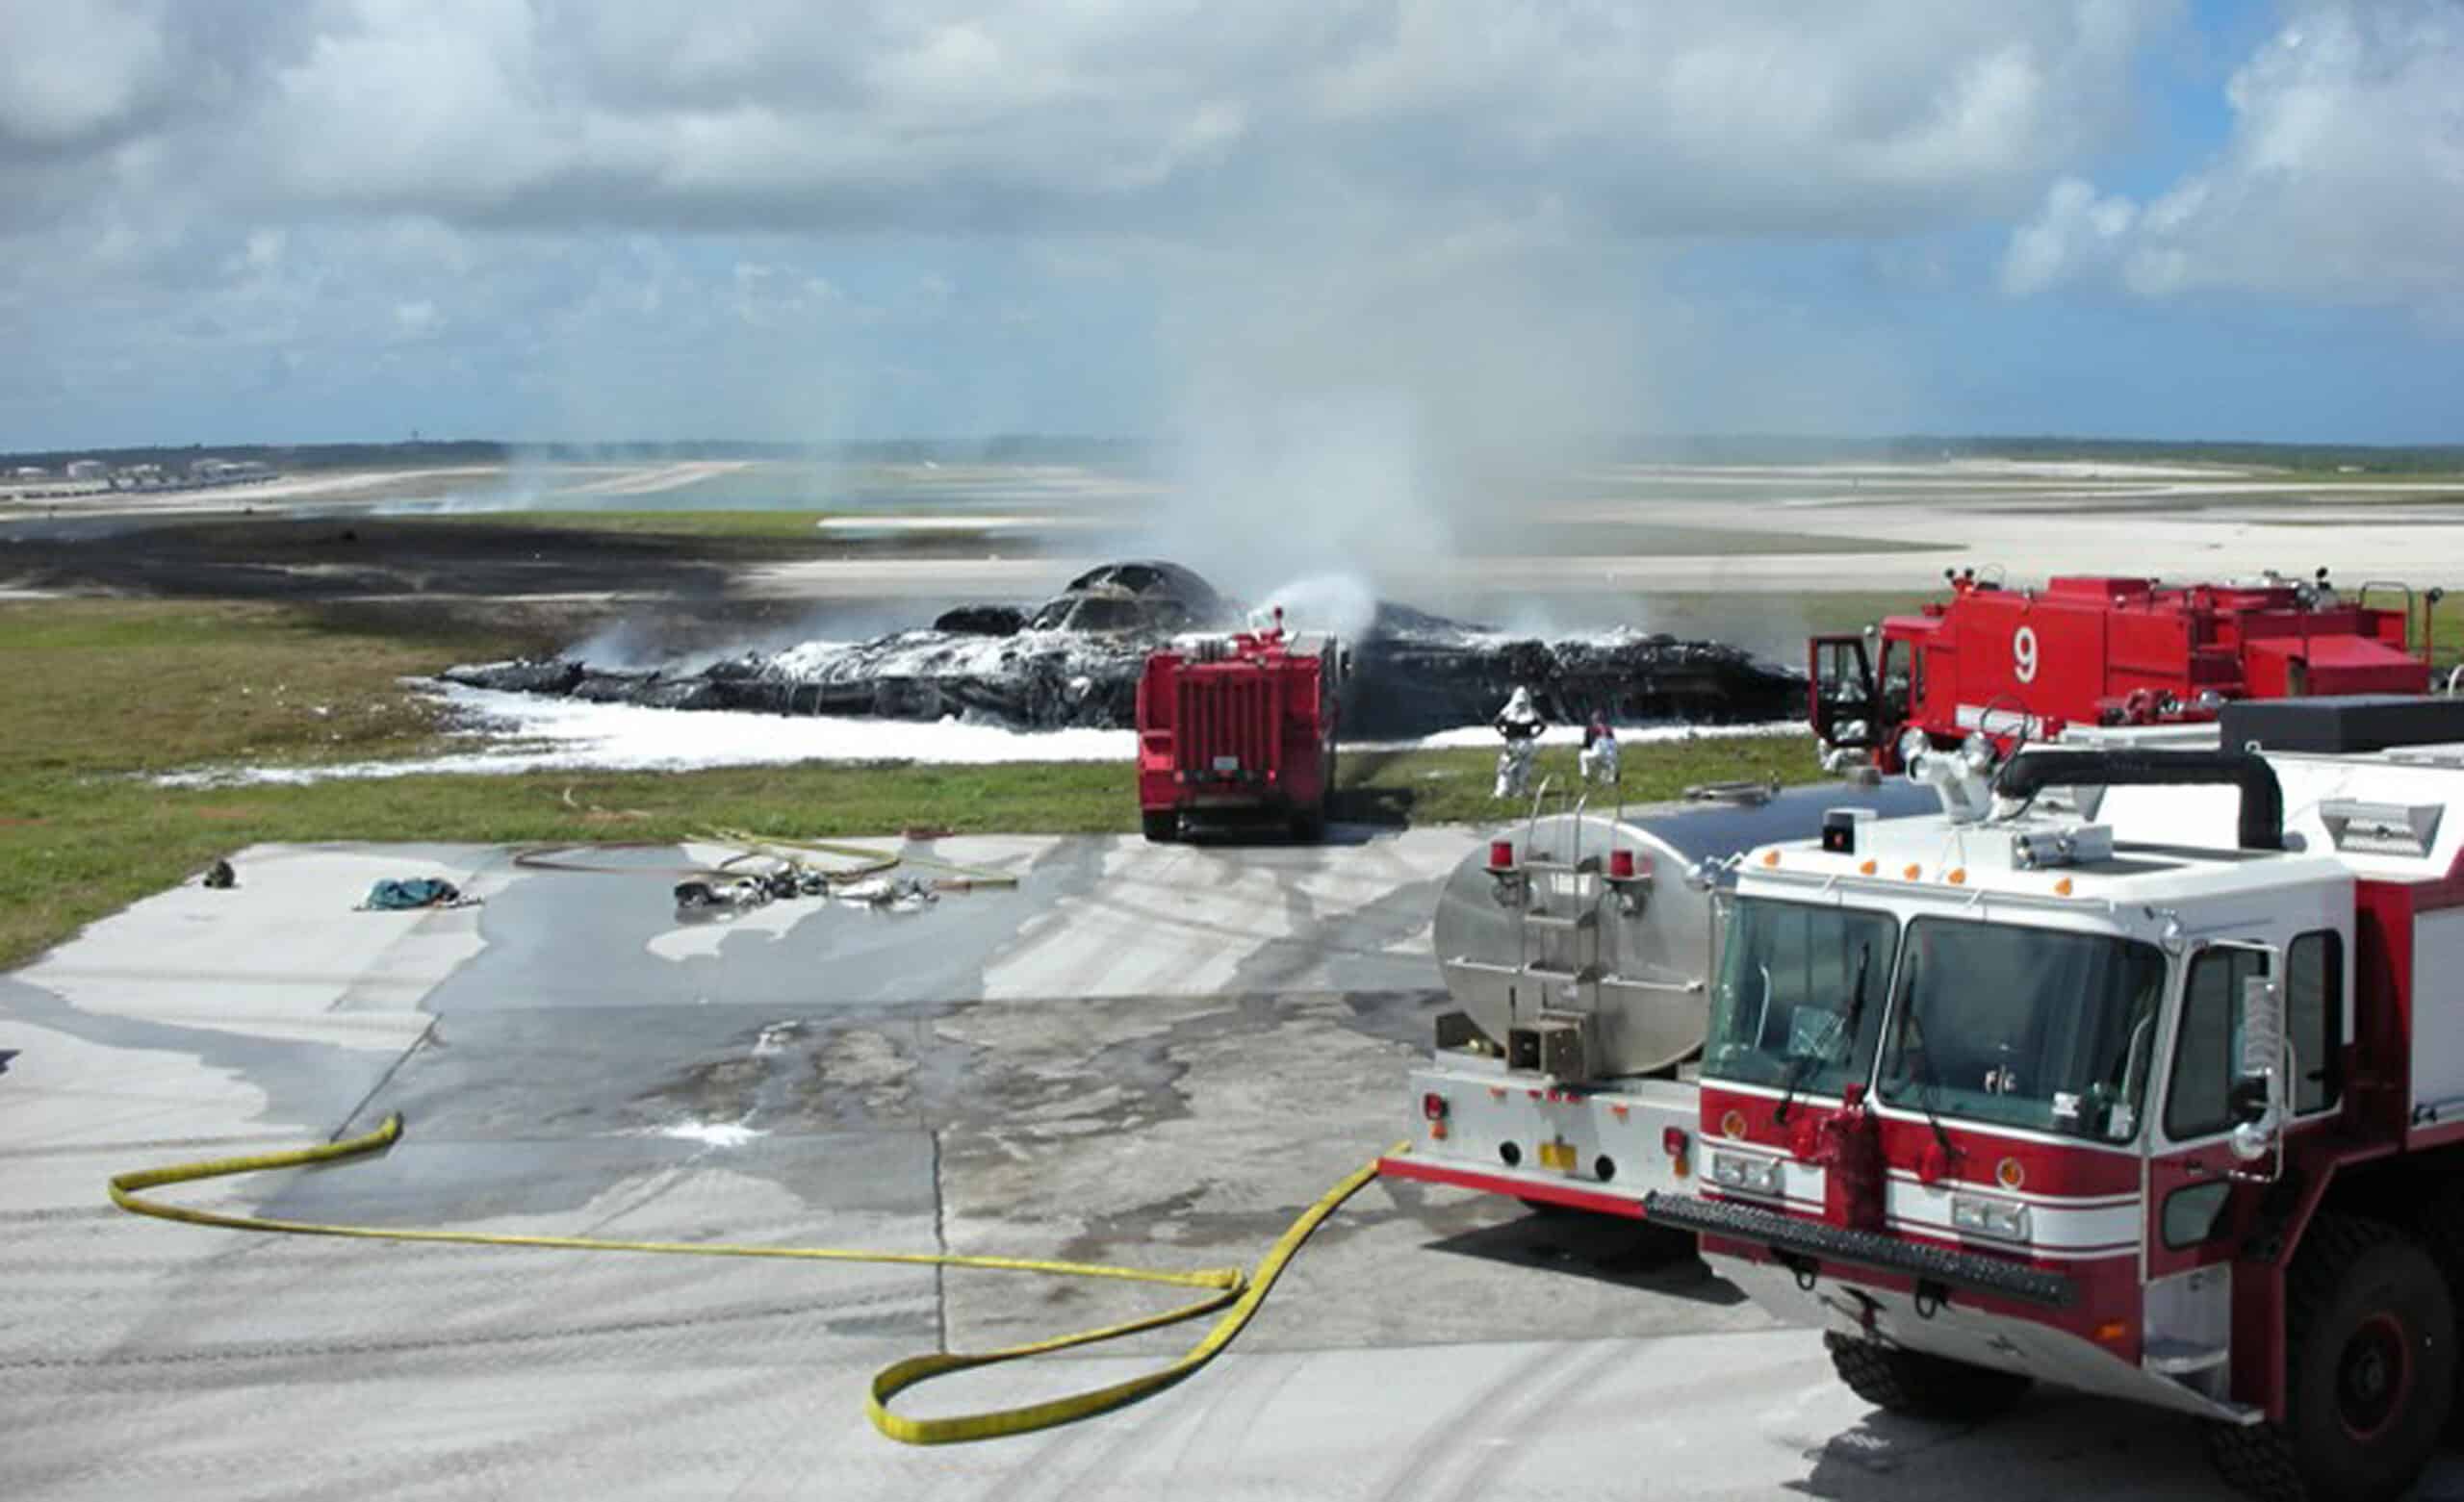 Photo of the Stealth bomber which crashed onto the runway at Guam in February, 2008